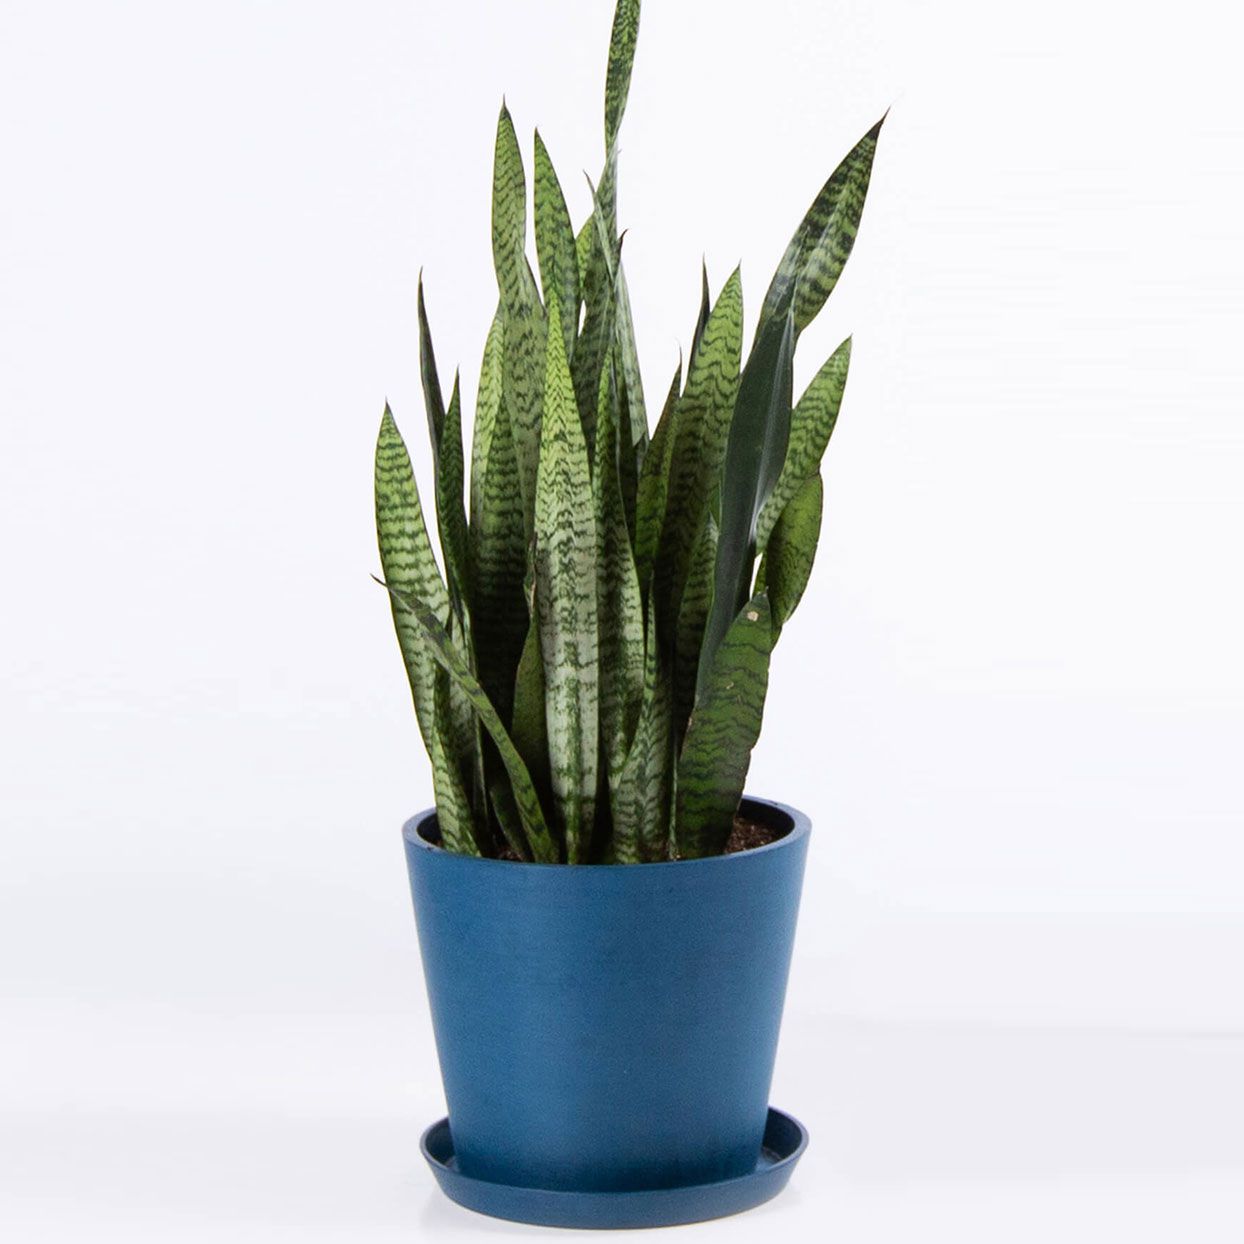 3 Foot Potted Sansevieria Plant, Snake Plant